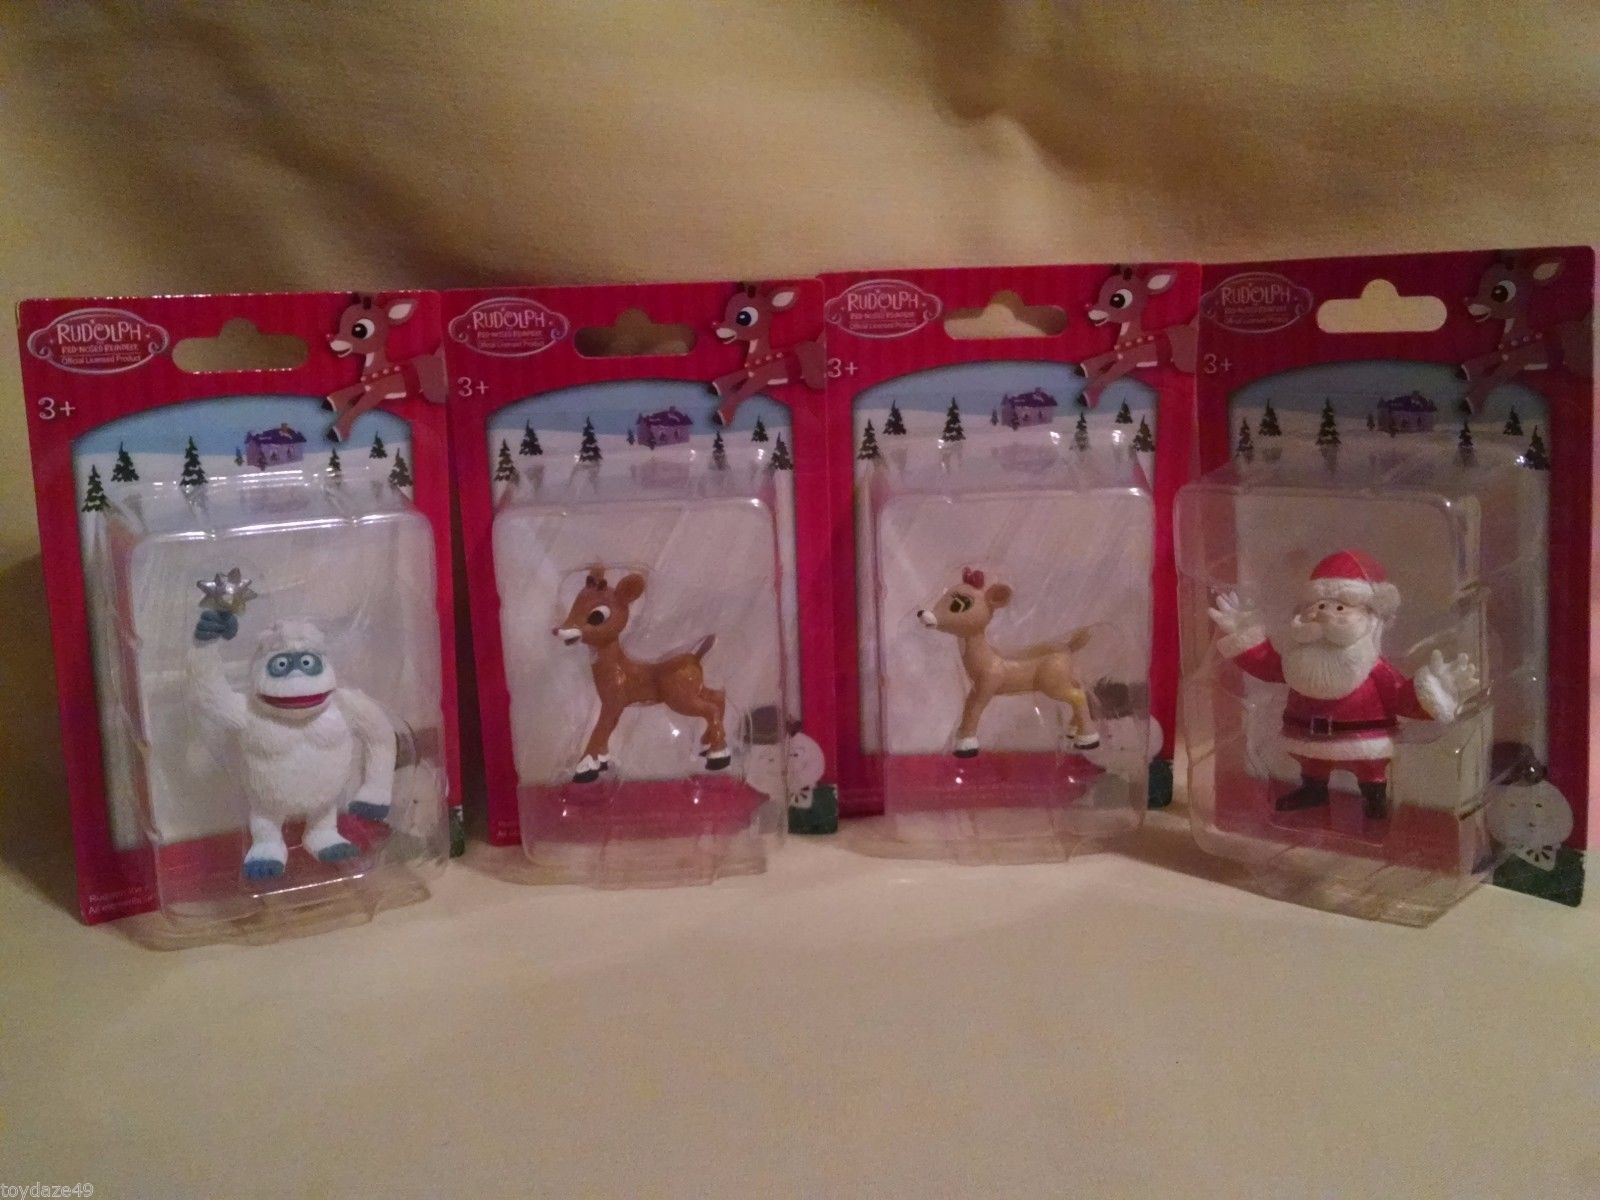 Rudolph The Red Nosed Reindeer 2" FIgure 48ct Case Assortment